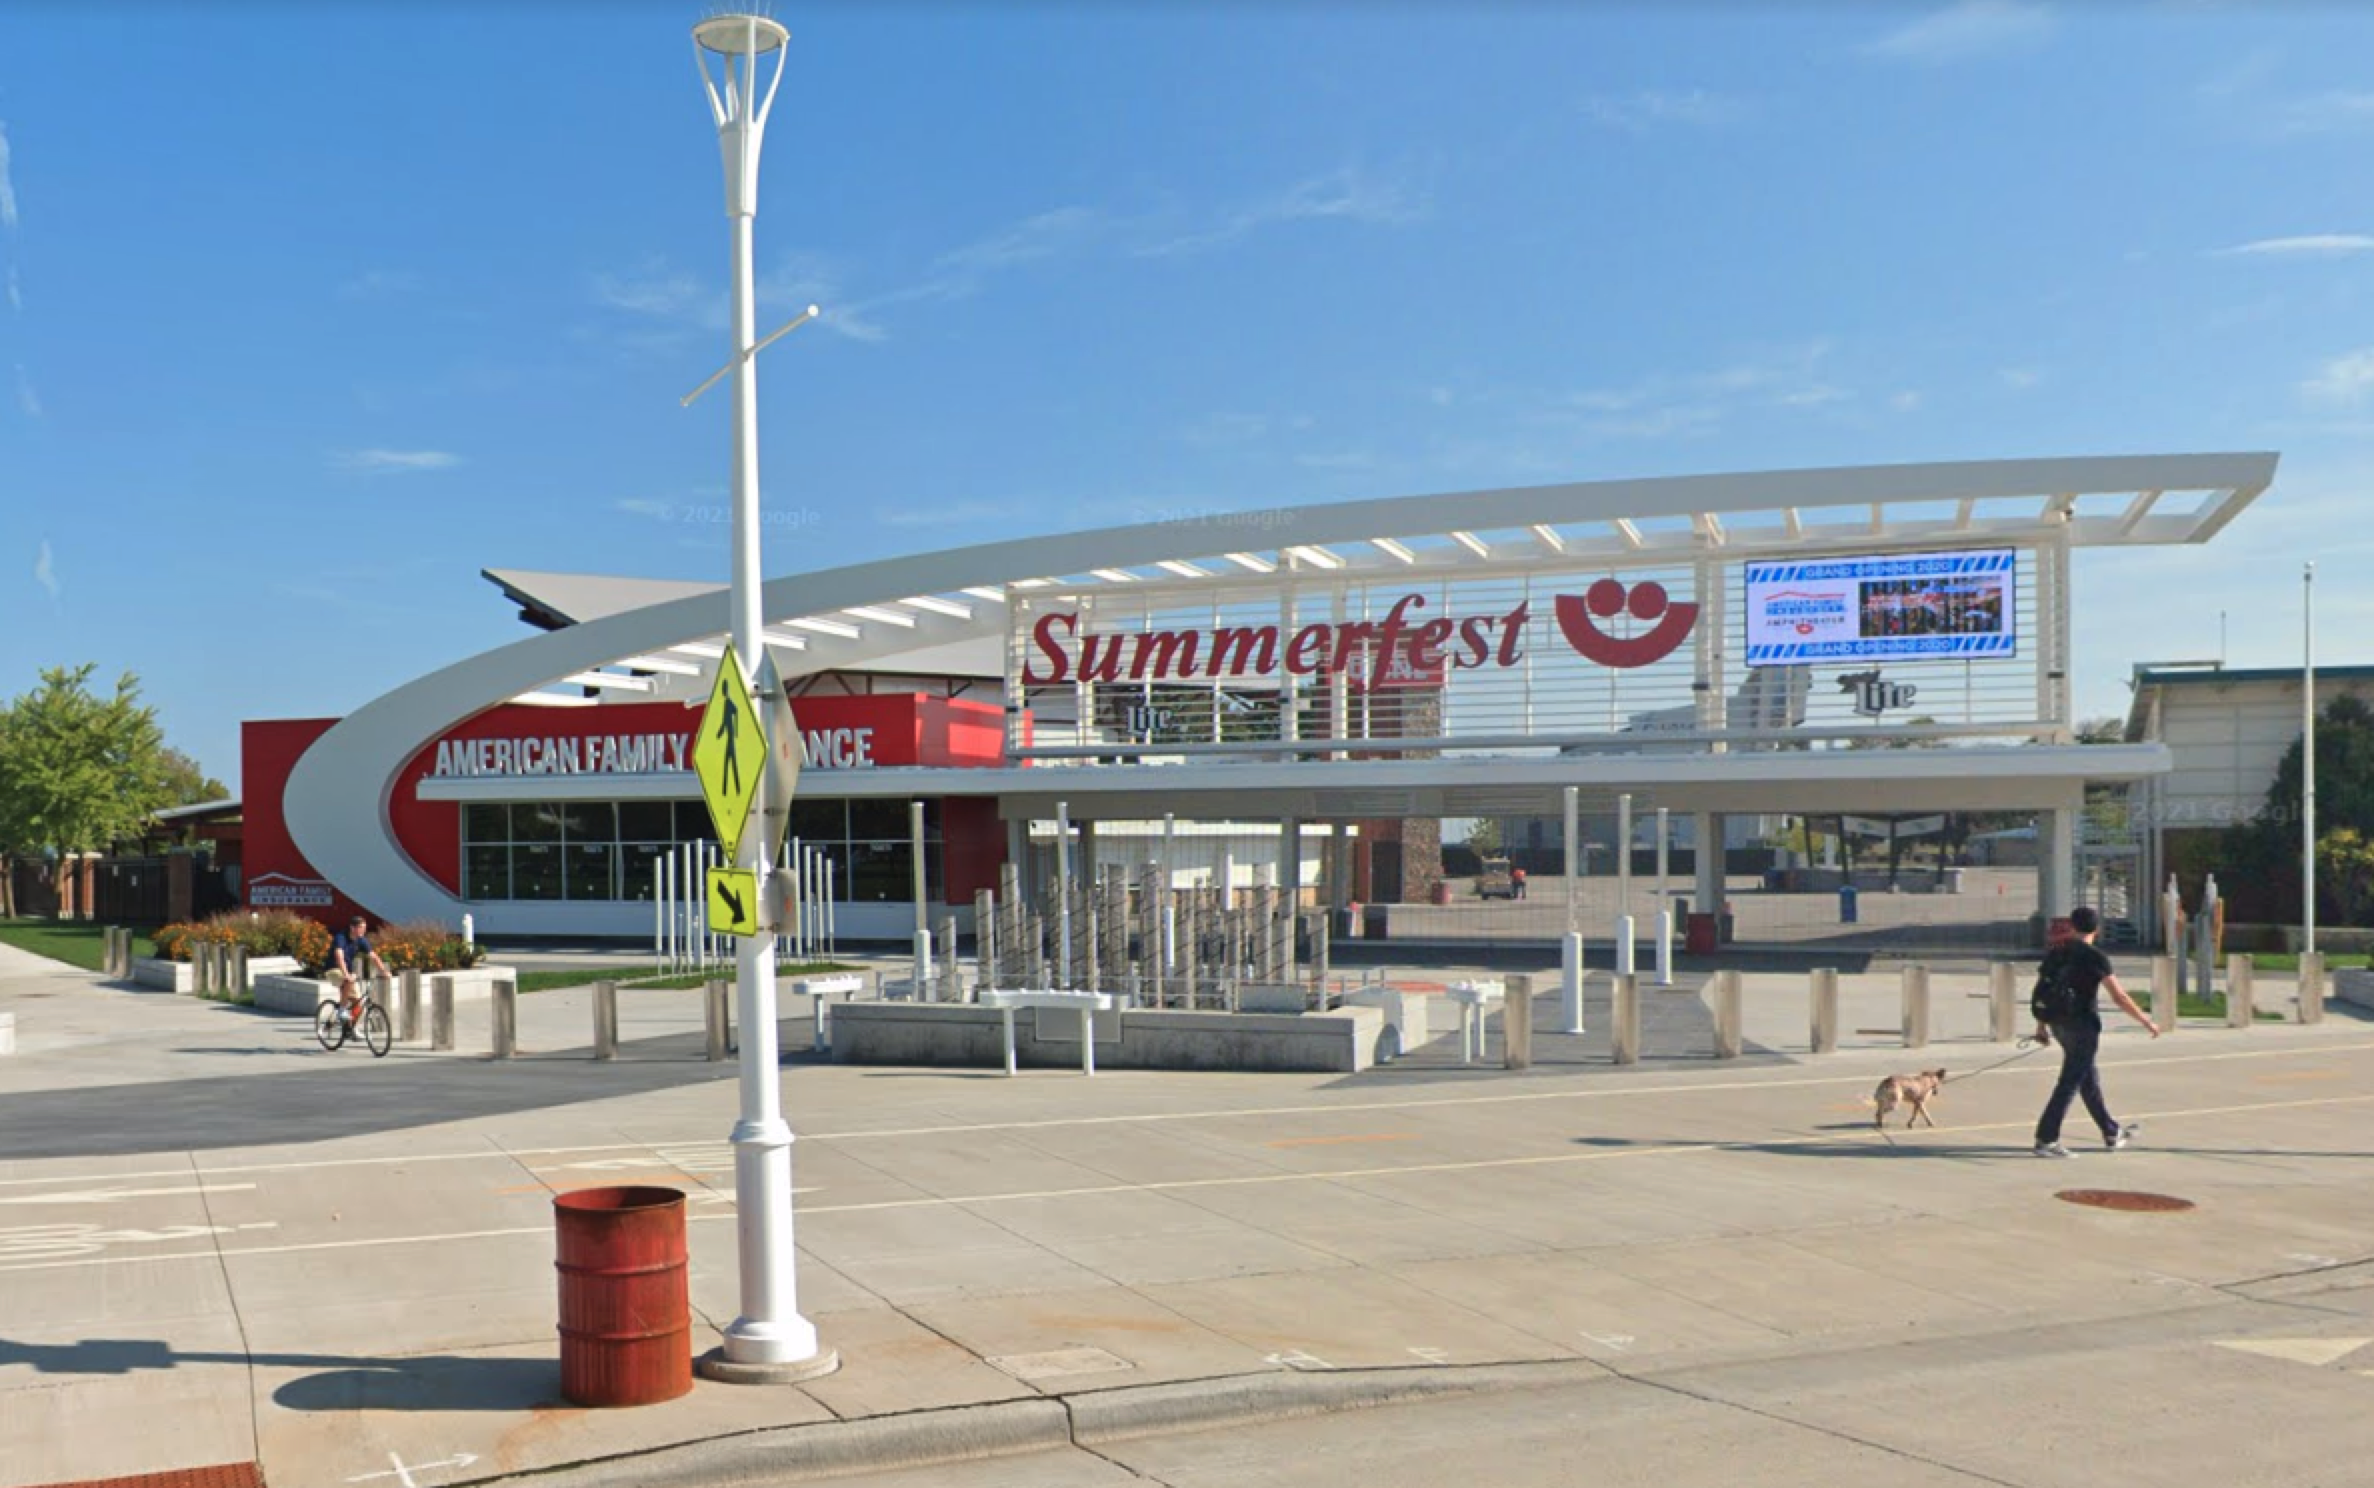 Book your event parking at Summerfest with ParqEx!